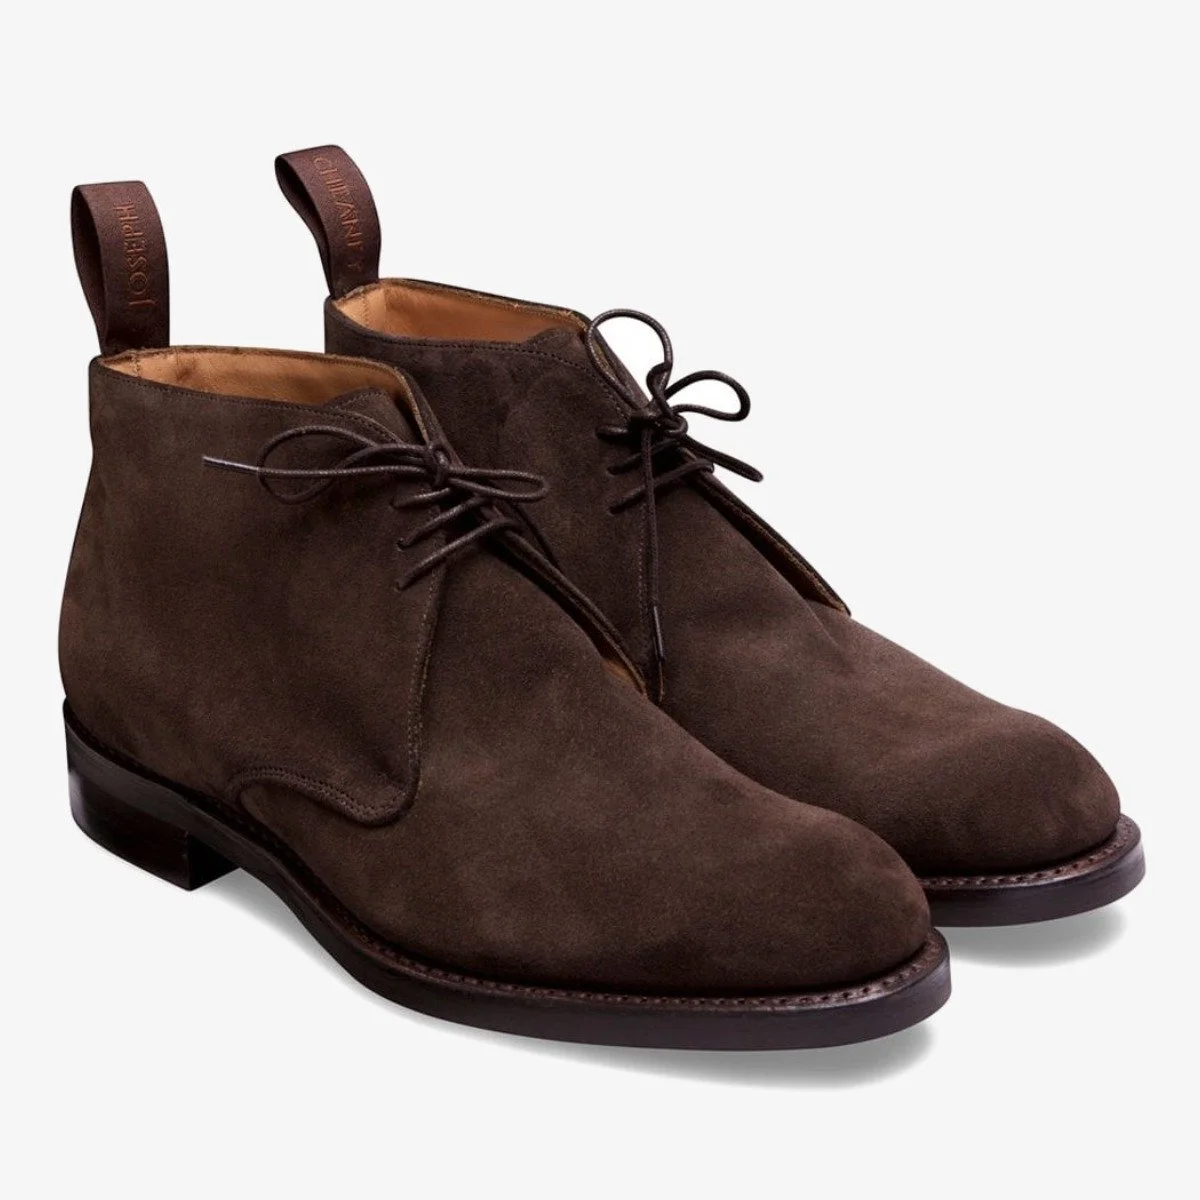 Cheaney Jackie III brown suede men's chukka boots